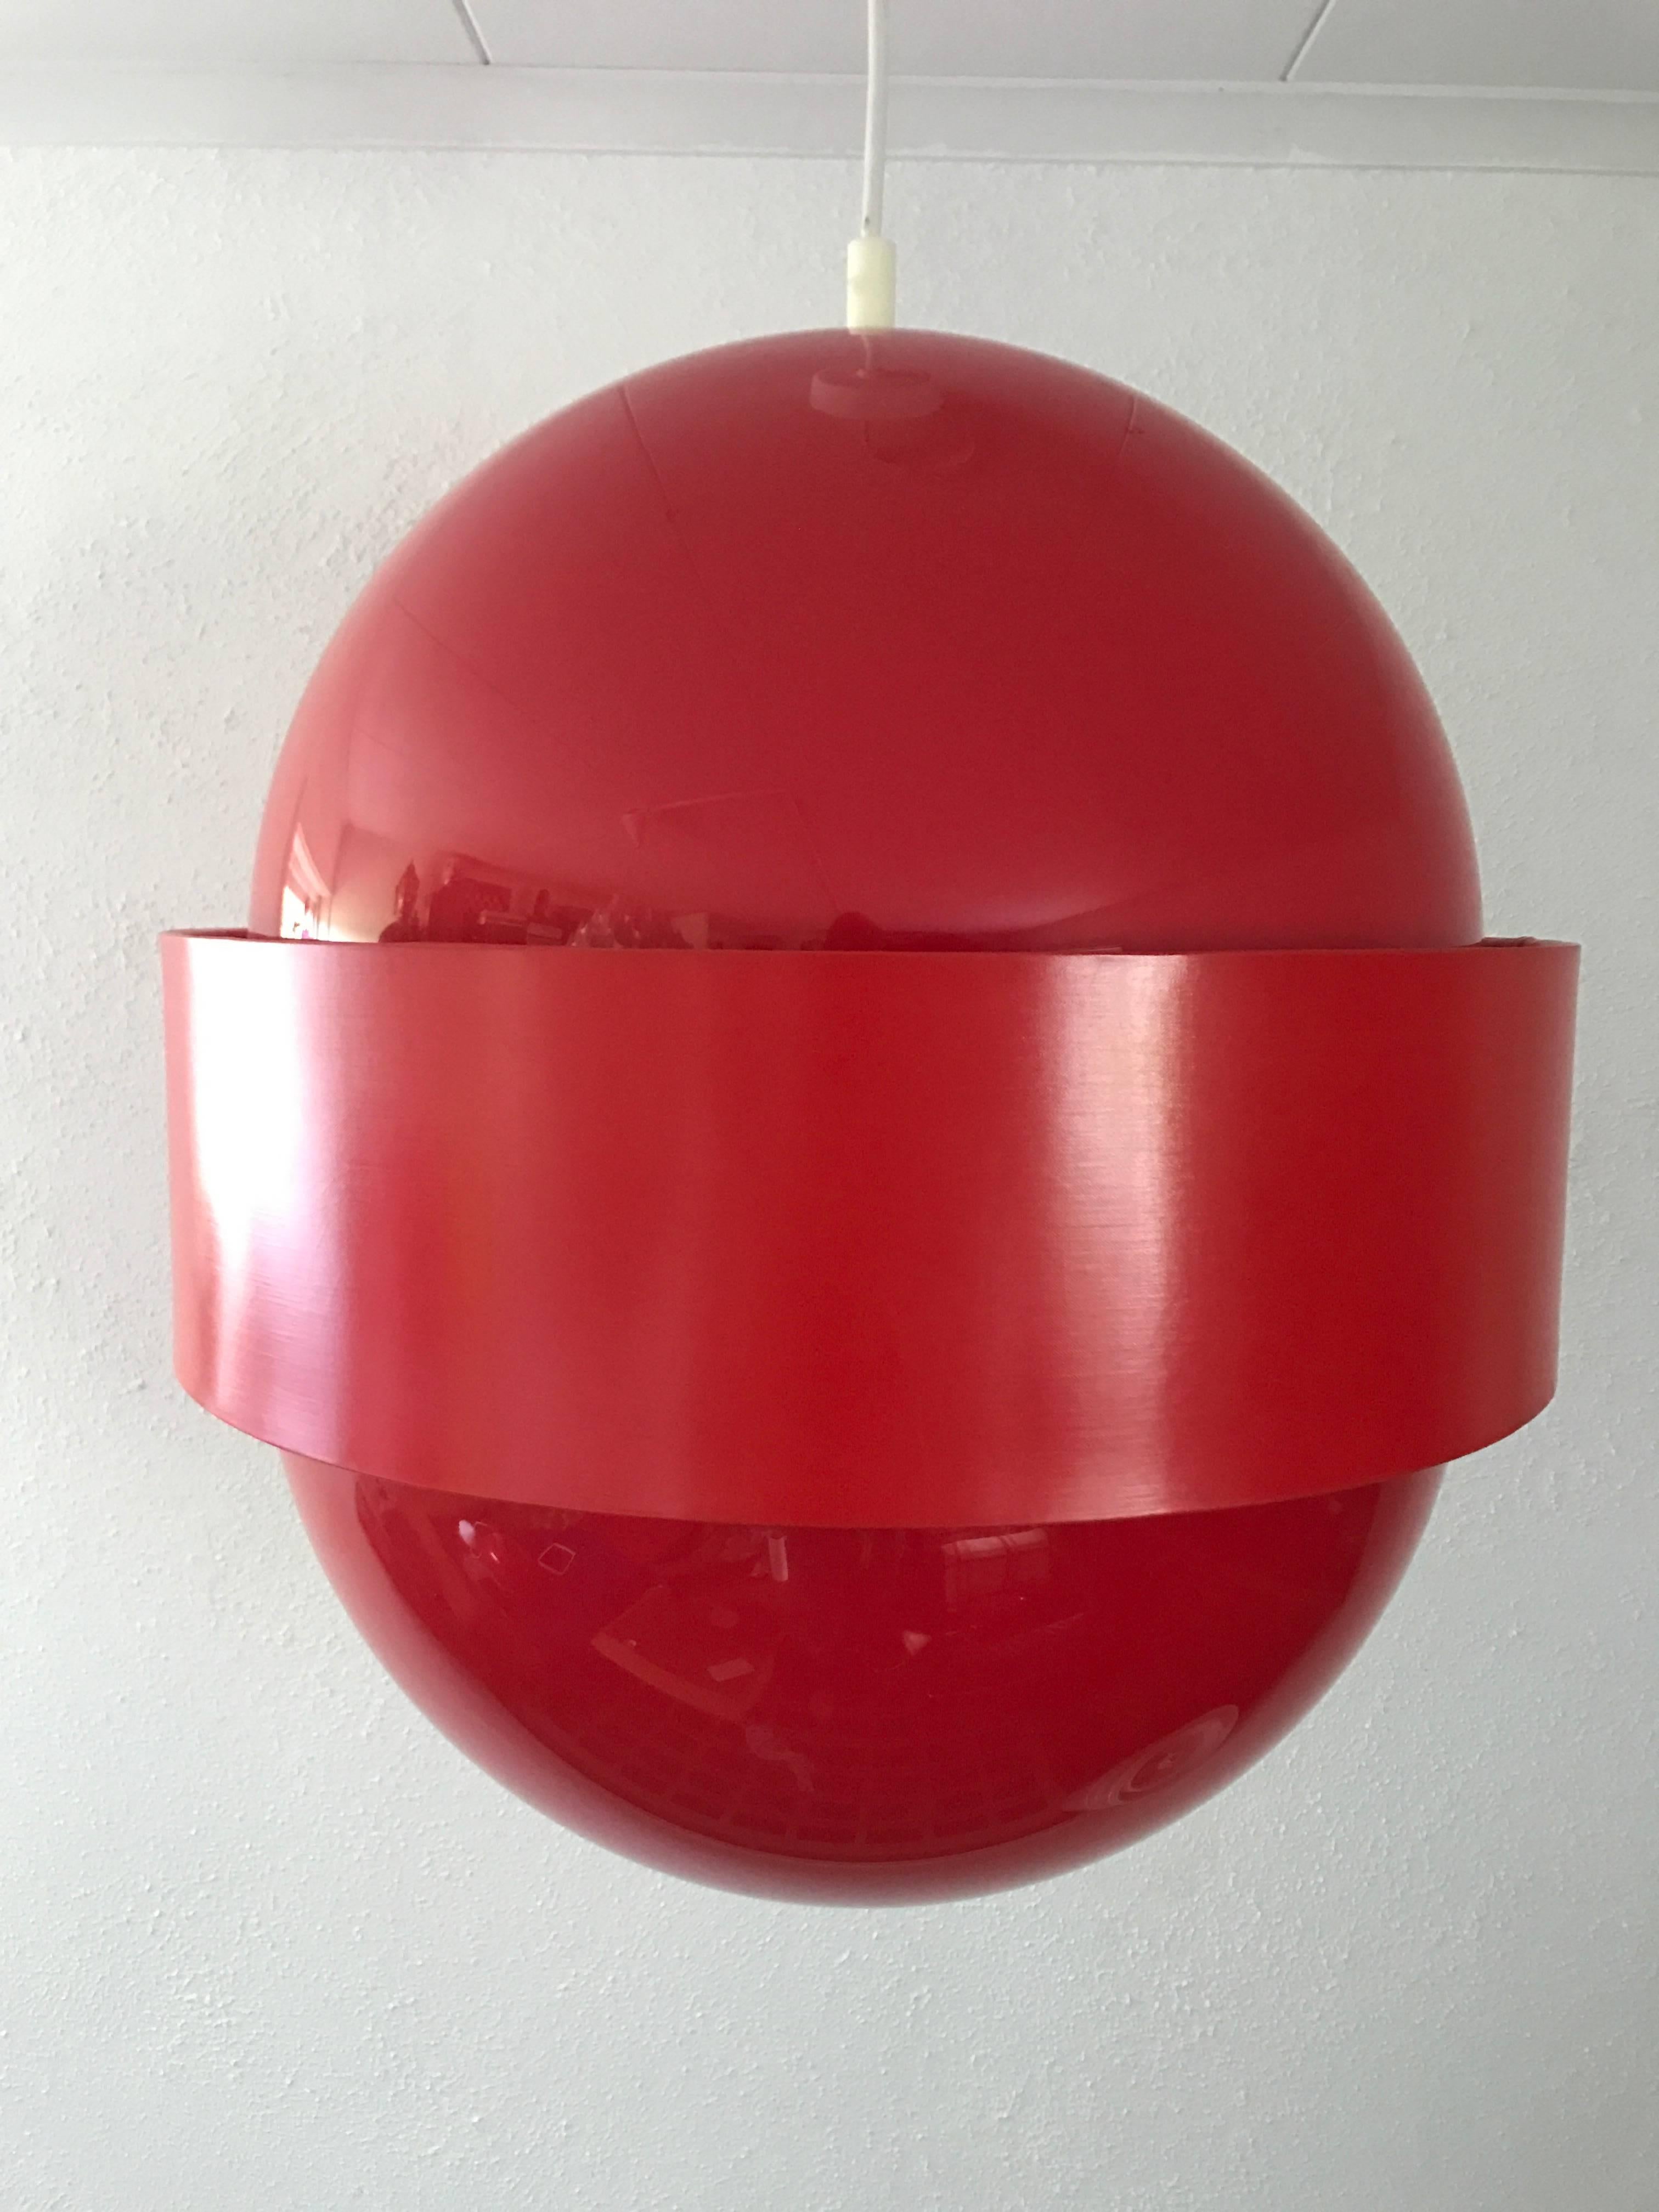 1970 Globo ring pendant lamps designed by Uno and Osten Kristiansson for Luxus
Very rare and beautiful plastic globo ring series designed by Uno and Osten Kristiansson for Luxus in the late1960s-early 1970s. The diameters of the centre ring are 45,